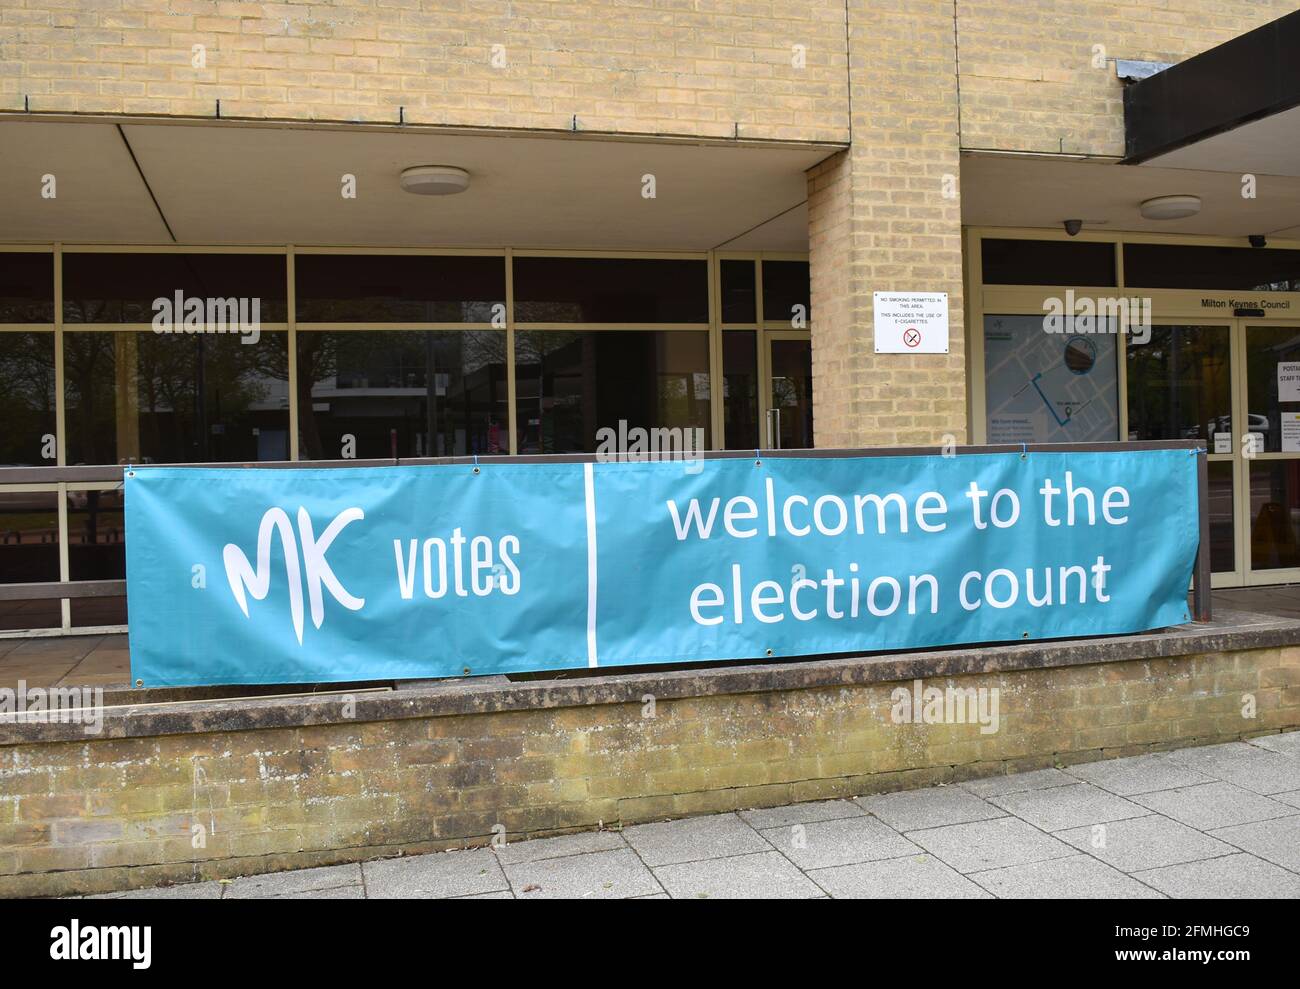 Banner at the office where counting of votes cast is due to take place:  'MK votes welcome to the election count'. Stock Photo